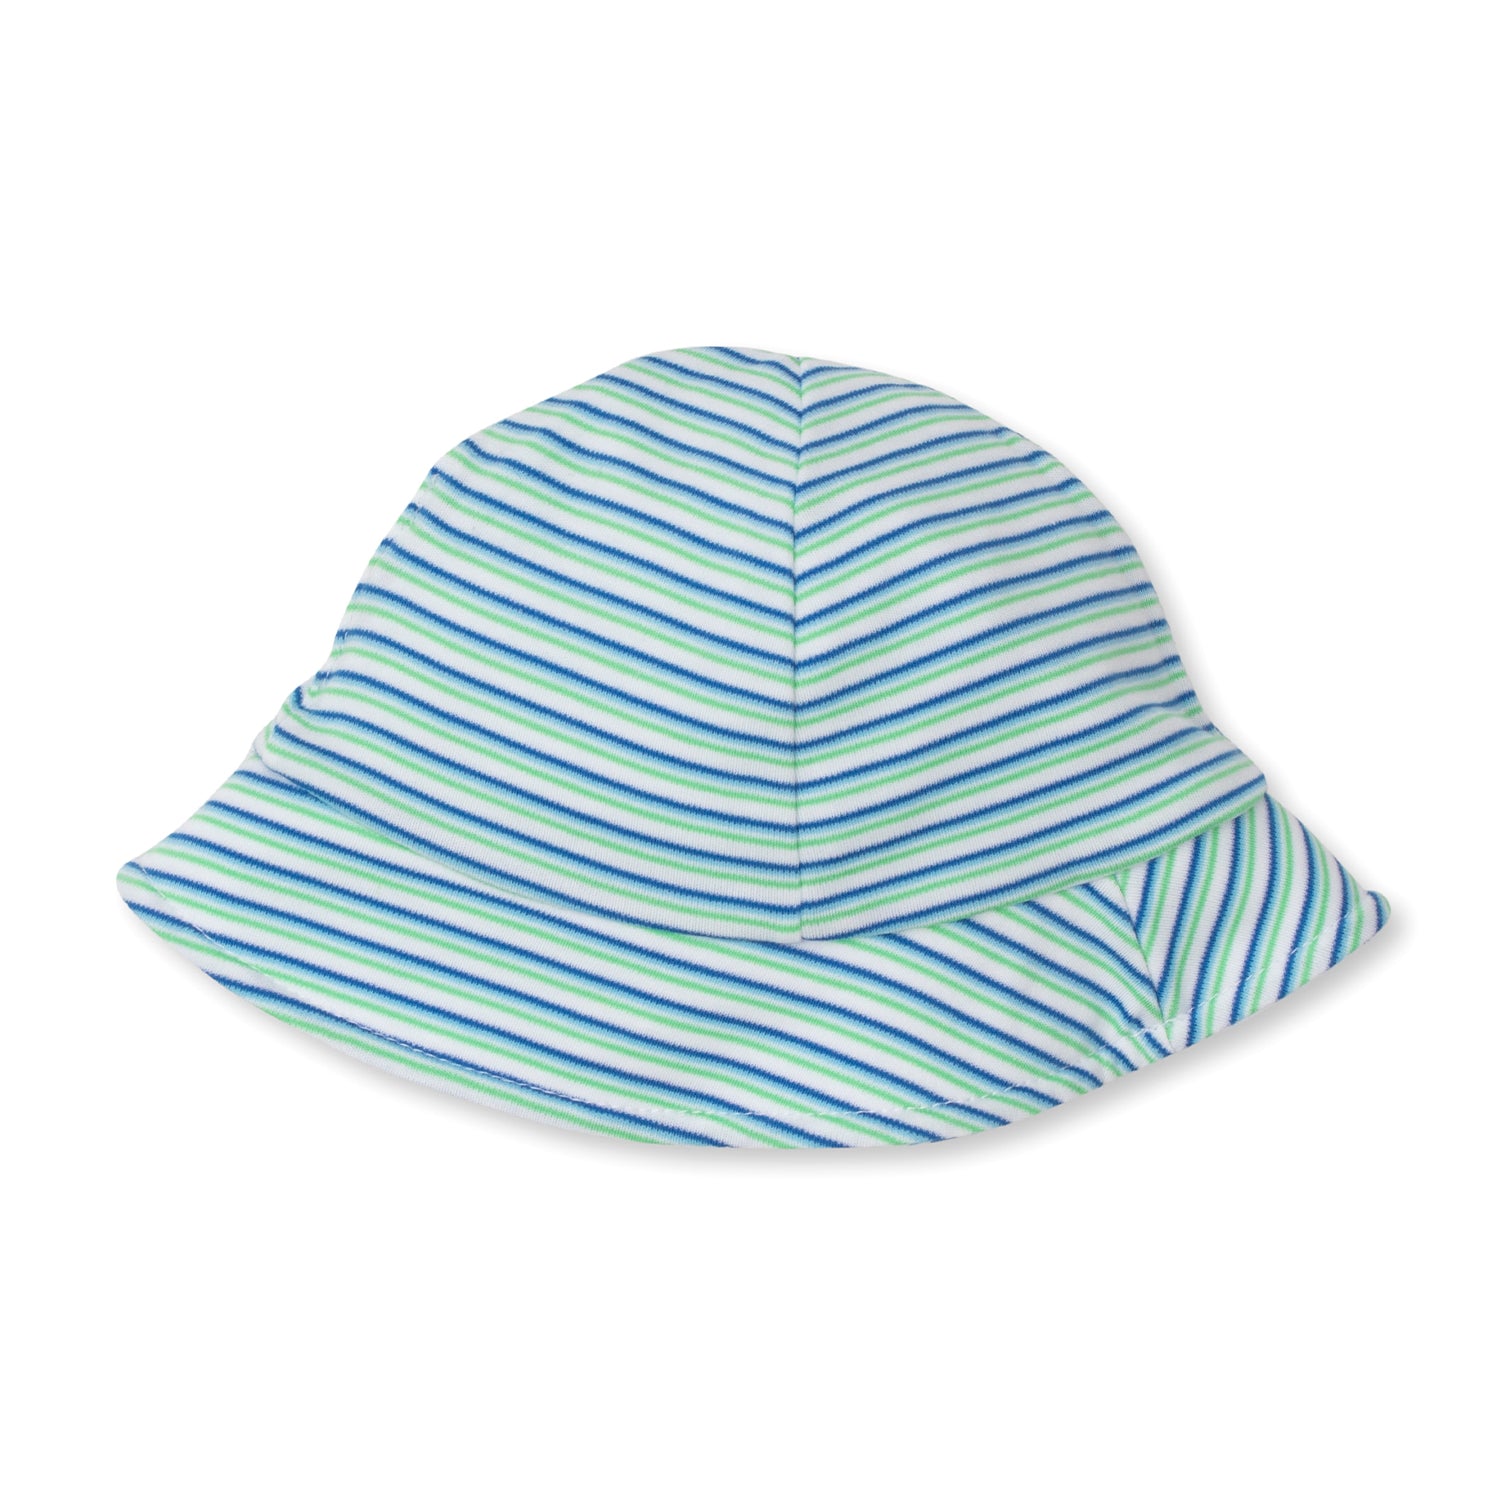 Whales Reversible Sunhat